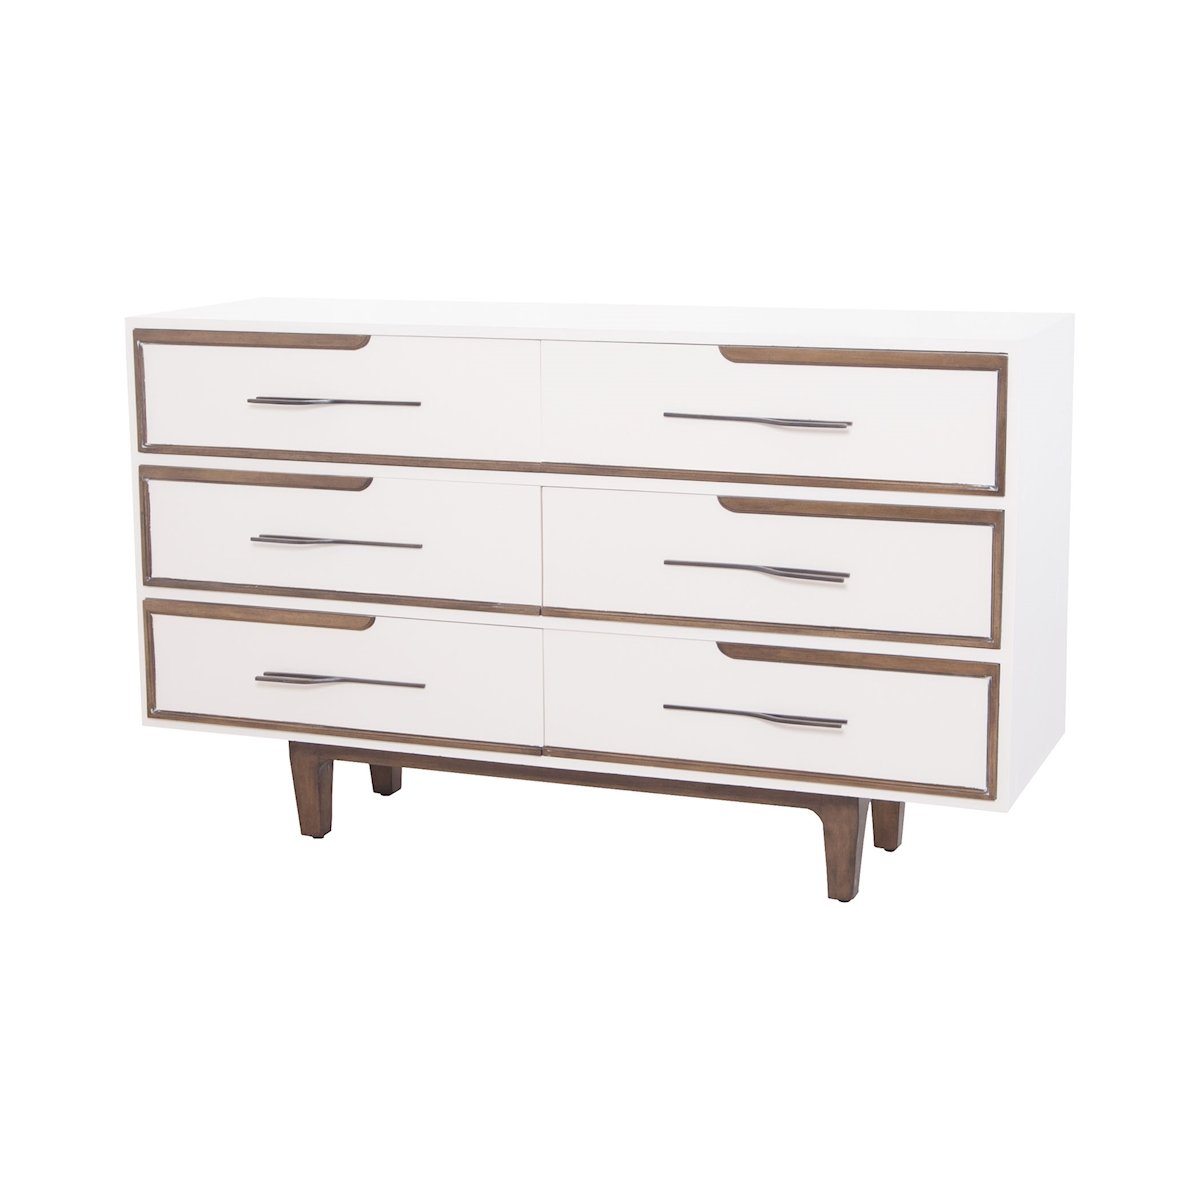 Hendron 6 Drawer Chest Furniture Dimond Home 